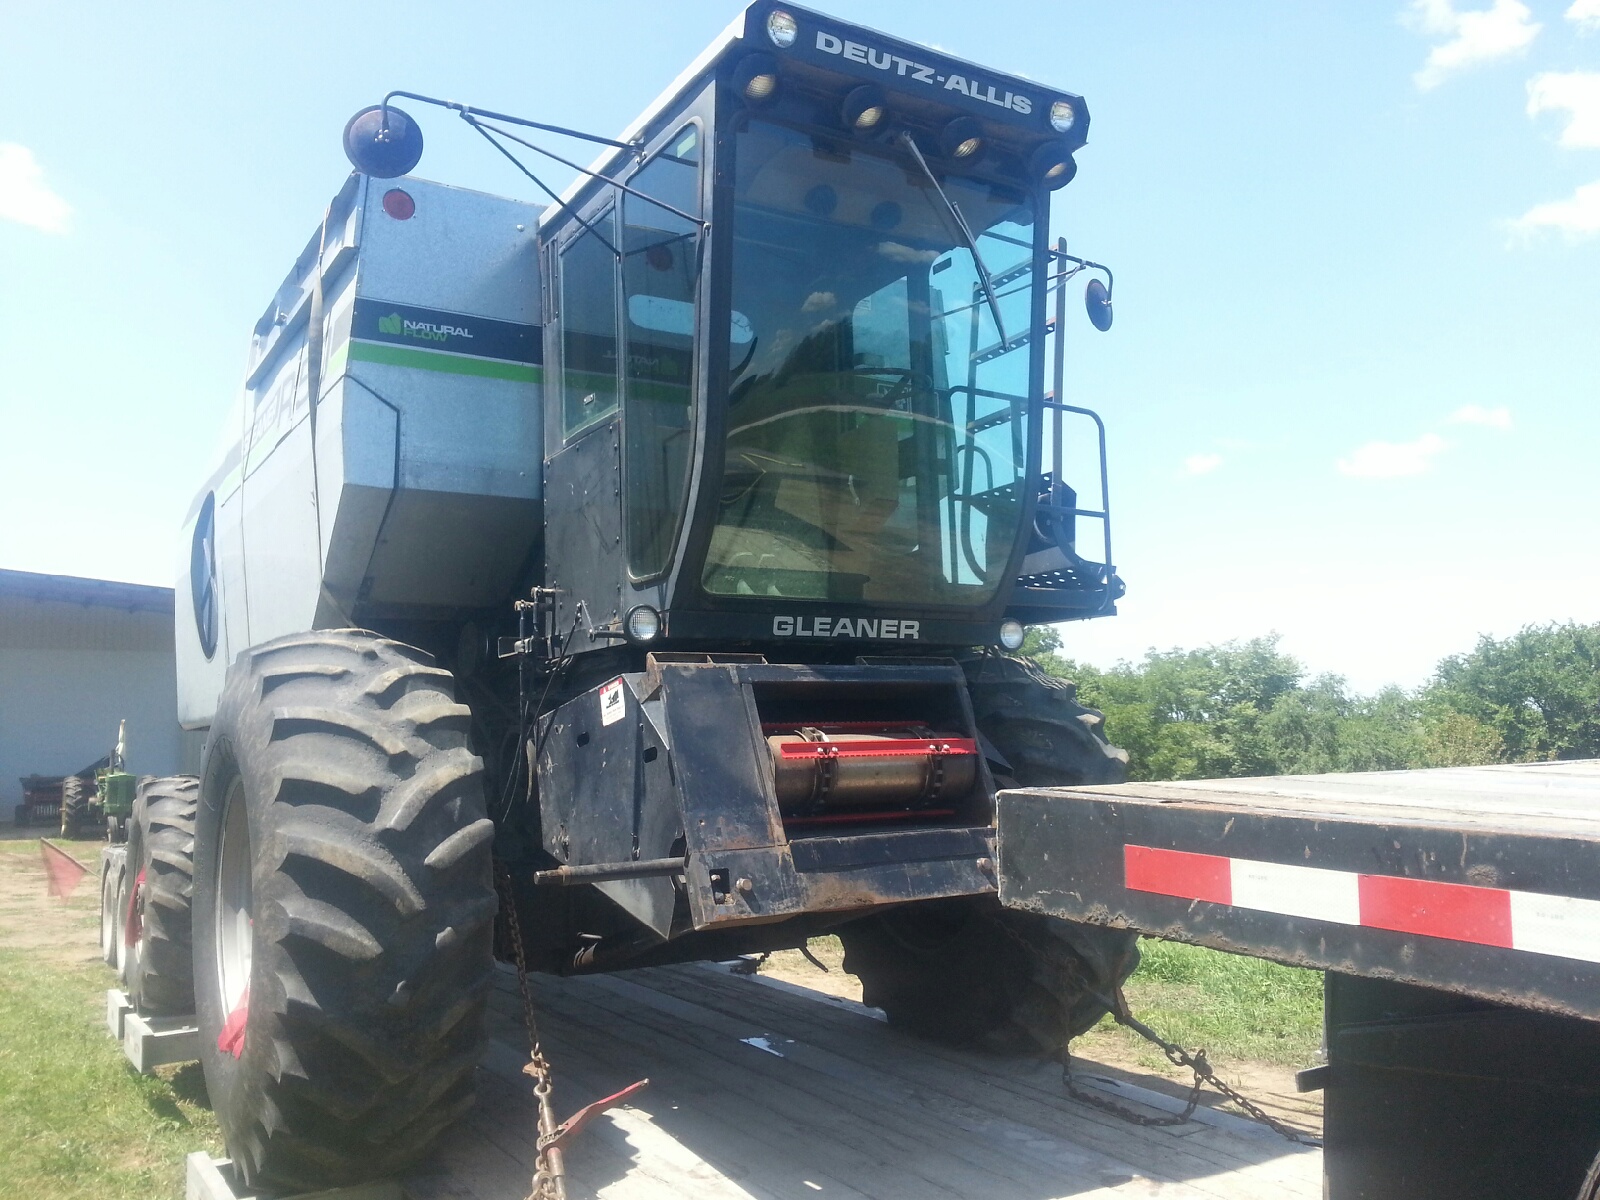 Shipping a Gleaner R50 Combine